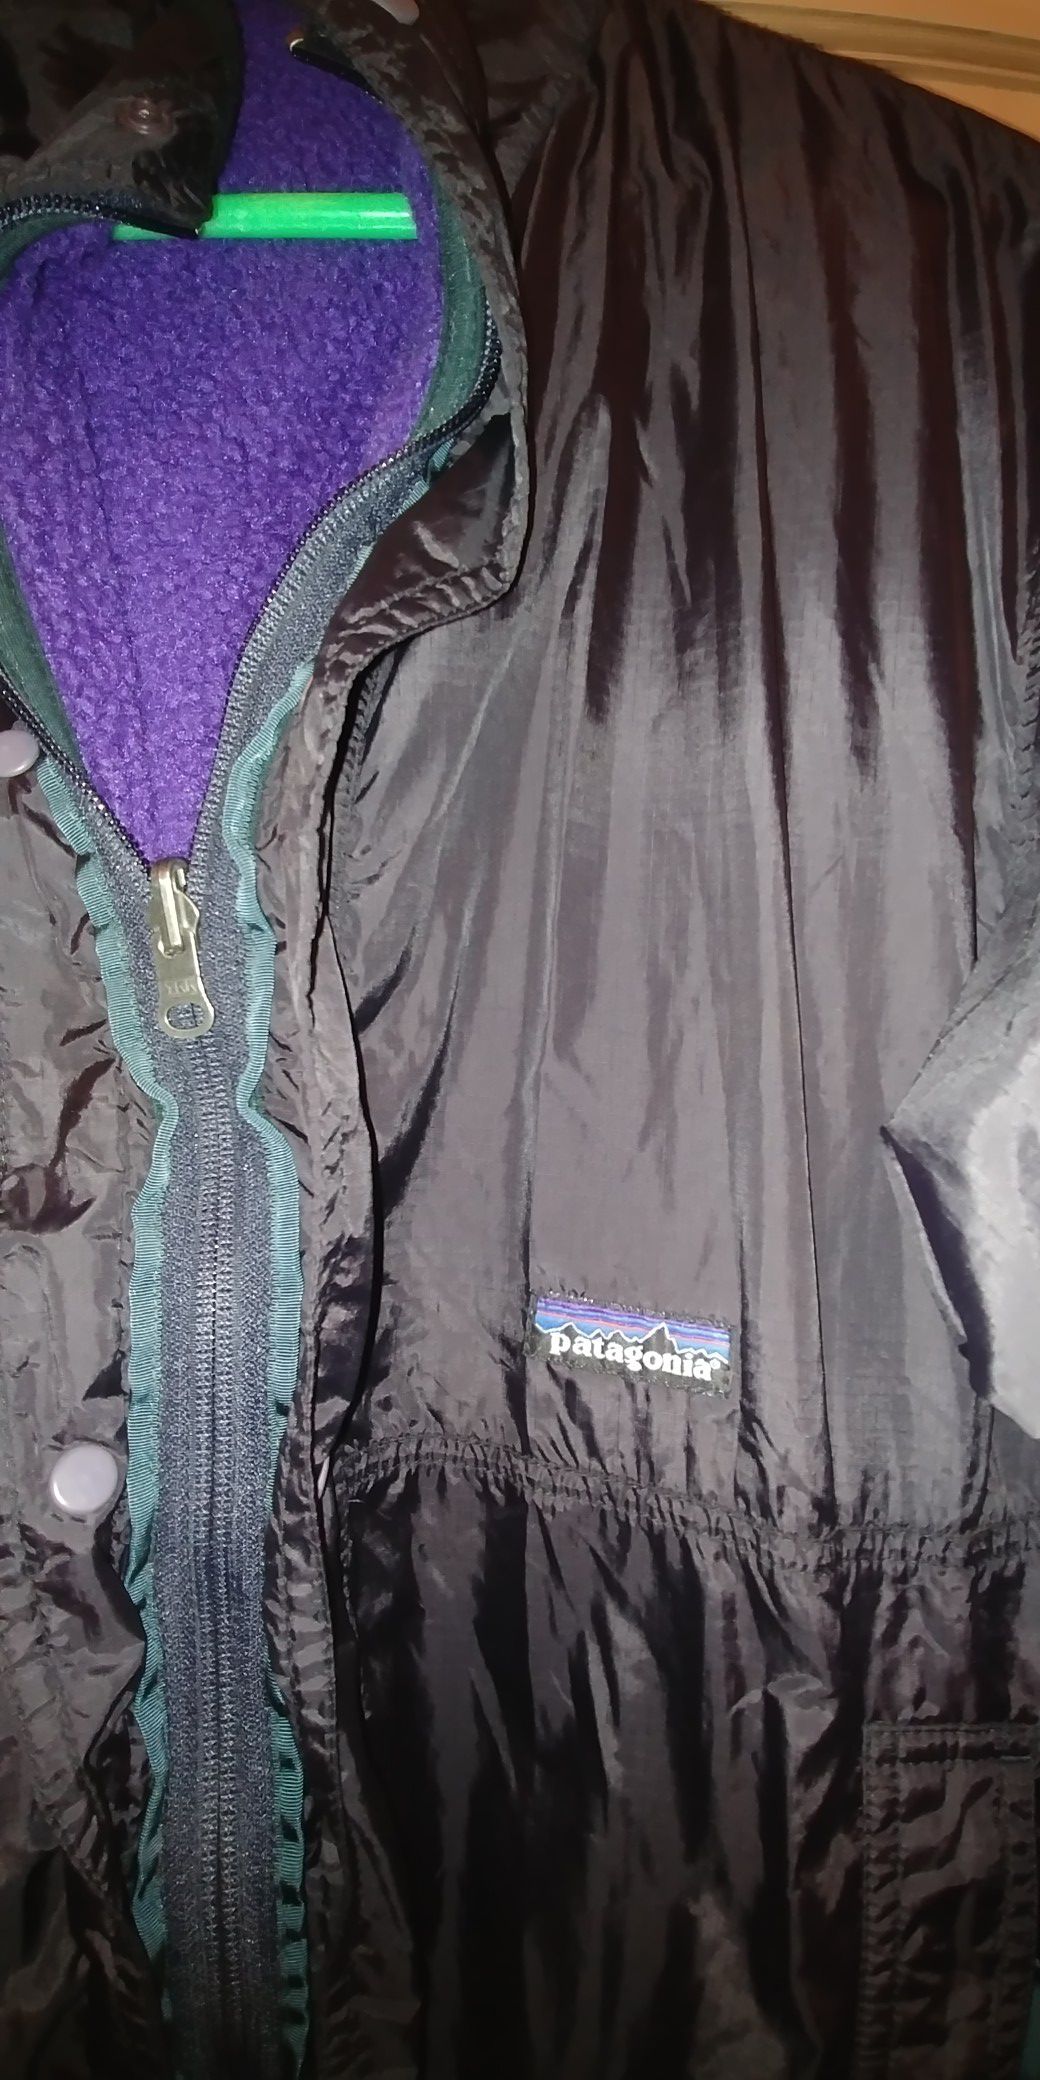 This is a 90s era Patagonia jacket in excellent condition it appears to be a men's large women's extra large